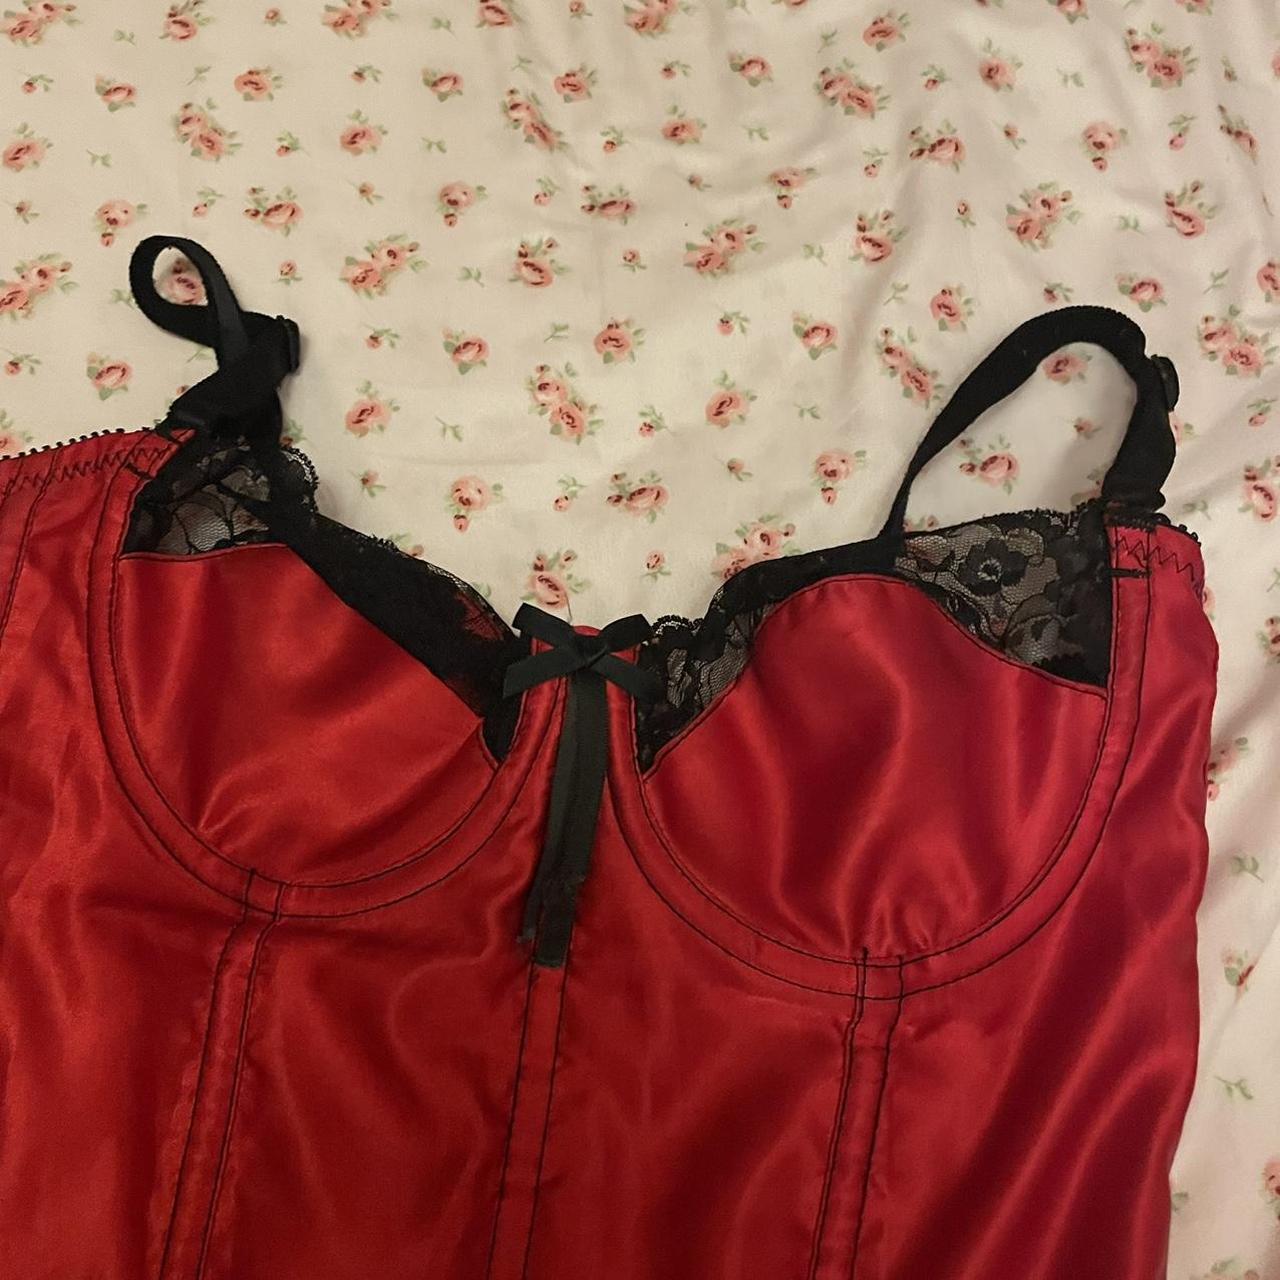 Sexist red and black corset / bustier, shimmery - Depop #red #and #black  #womens #outfit #redandblackwome…